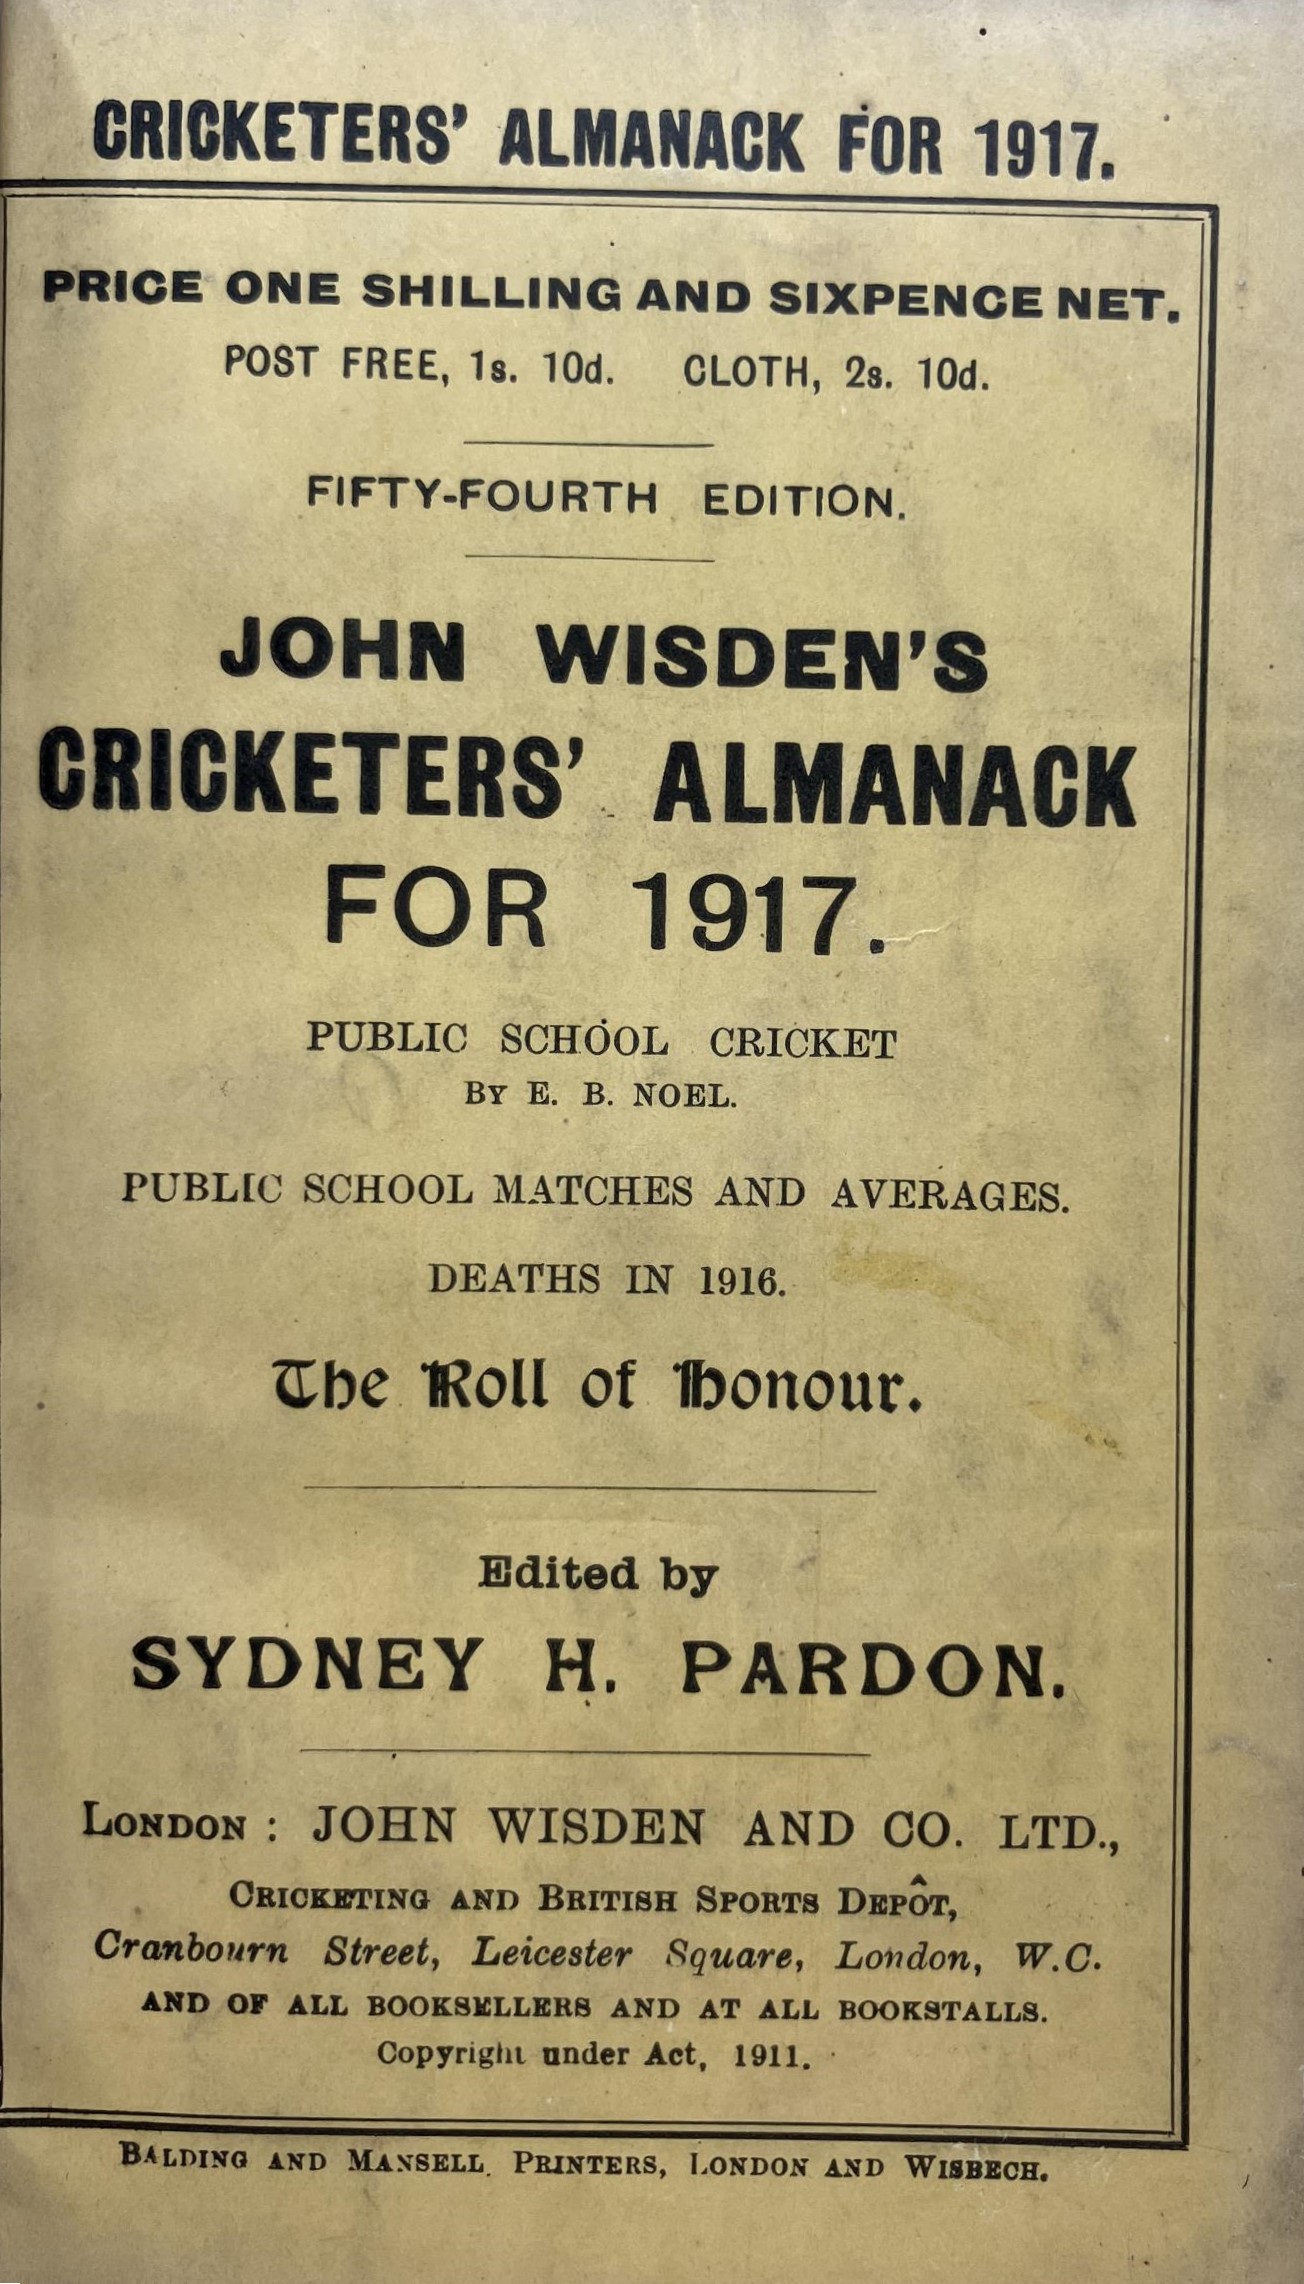 A Wisden Cricketers' Almanack, 1917 Provenance:  From the Harry Brewer Cricket Memorabilia - Image 3 of 4